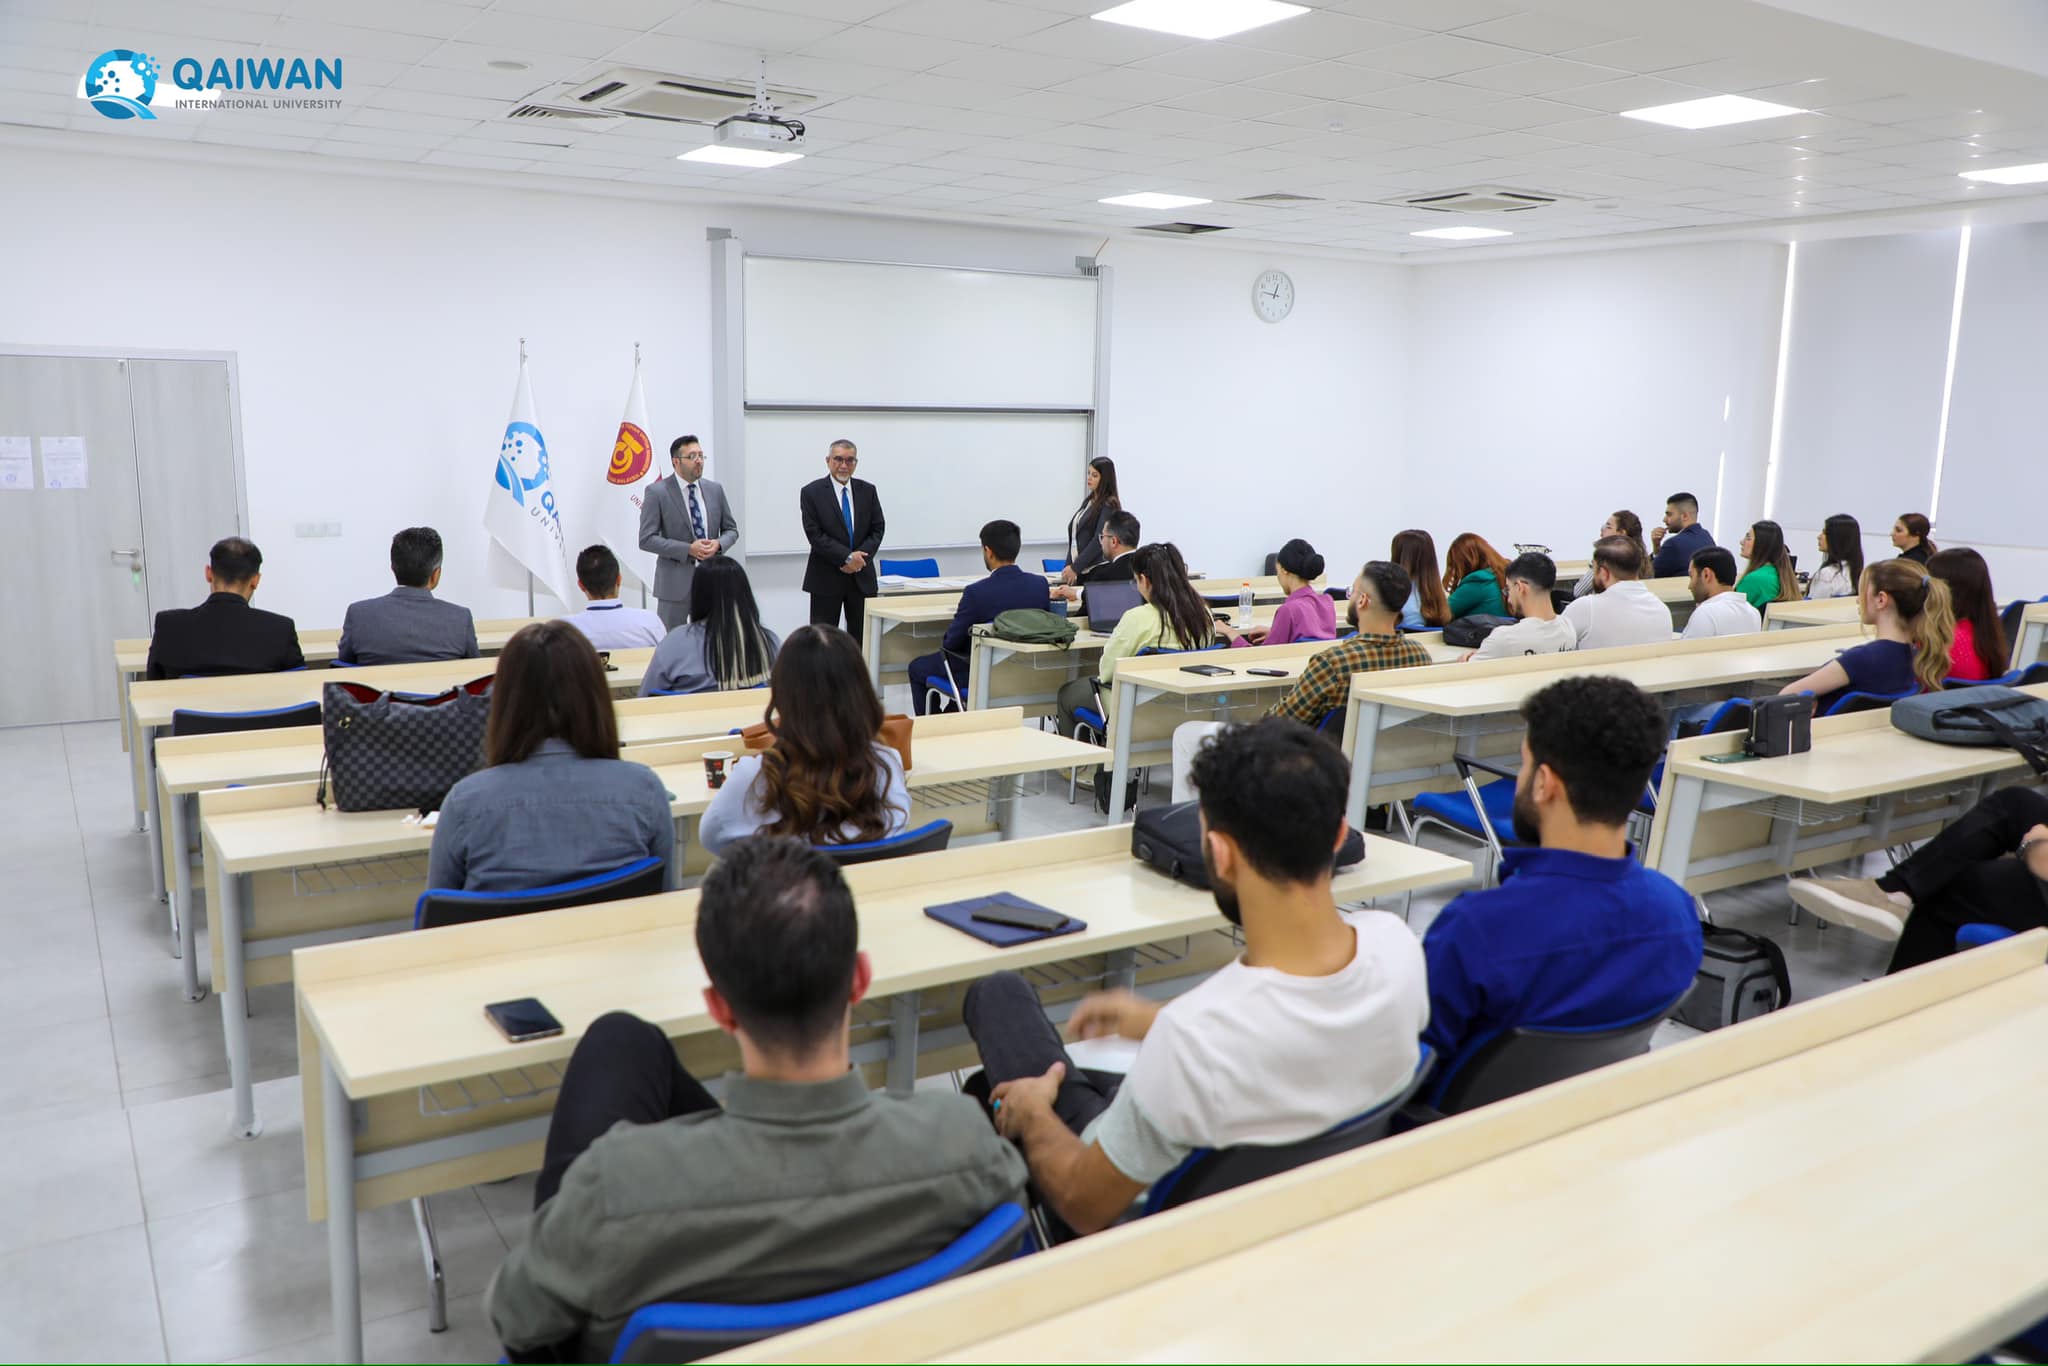 Award ceremony for the students of the Faculty of Engineering and Computer Science